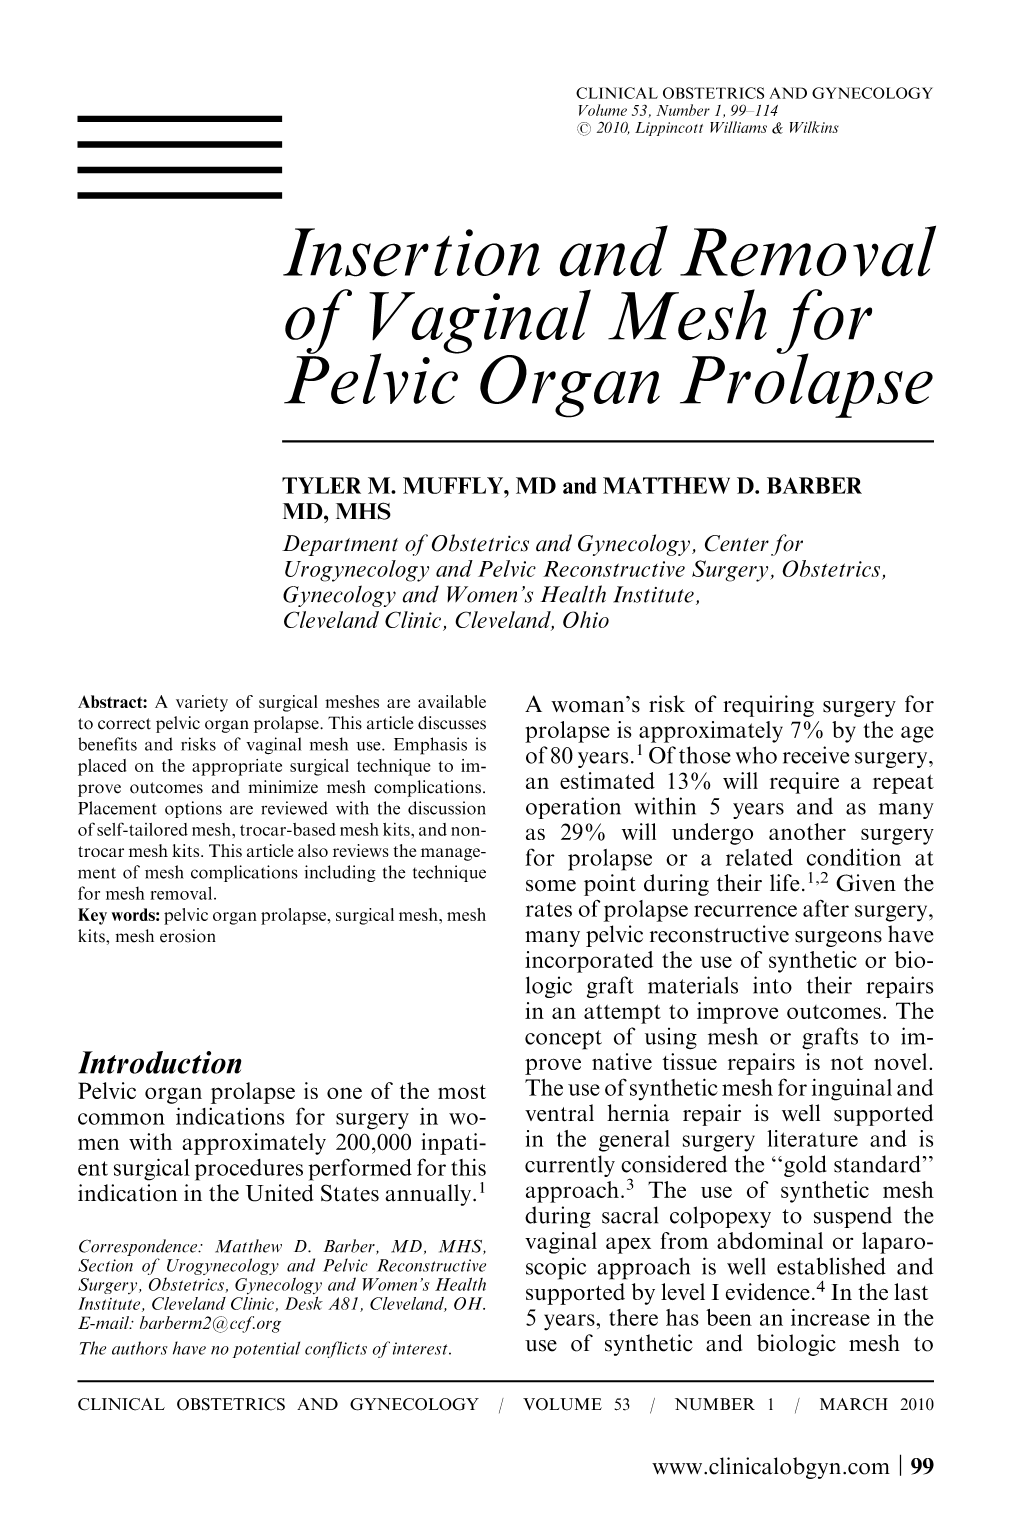 Insertion and Removal of Vaginal Mesh for Pelvic Organ Prolapse